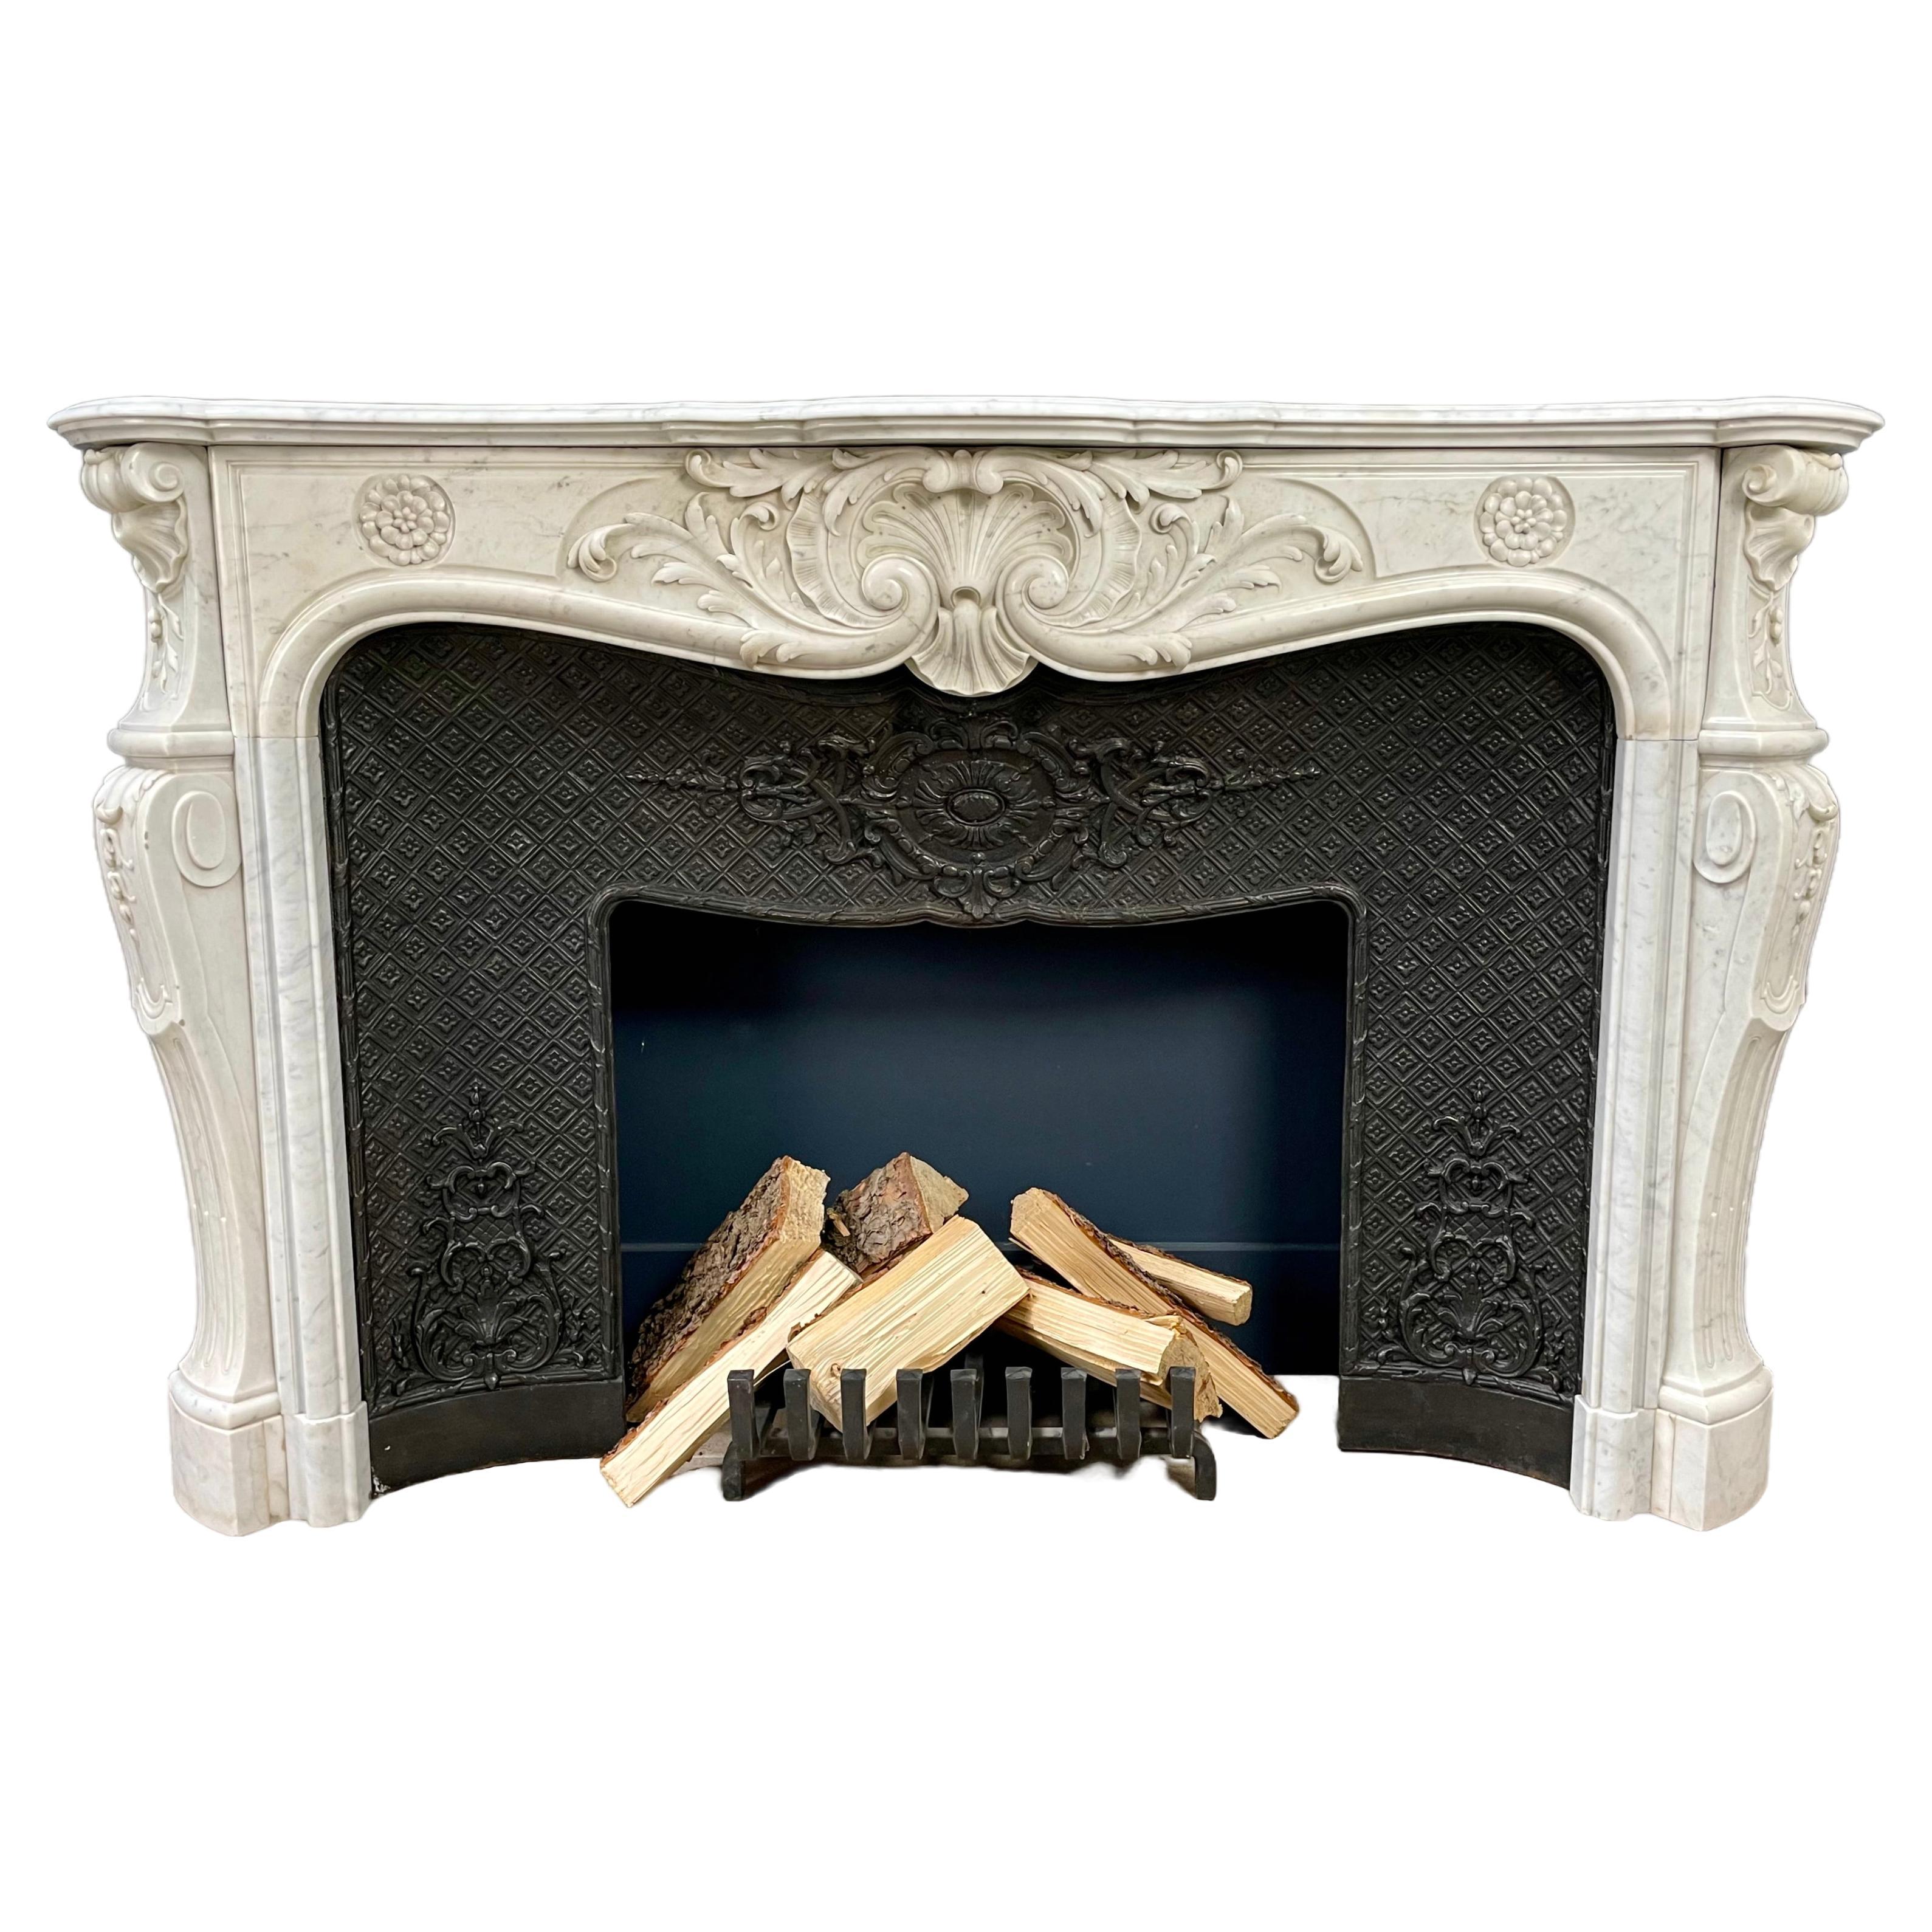 Luxury Antique French Shell Fireplace with Cast Iron Insert Fireplace FREE SHIP.